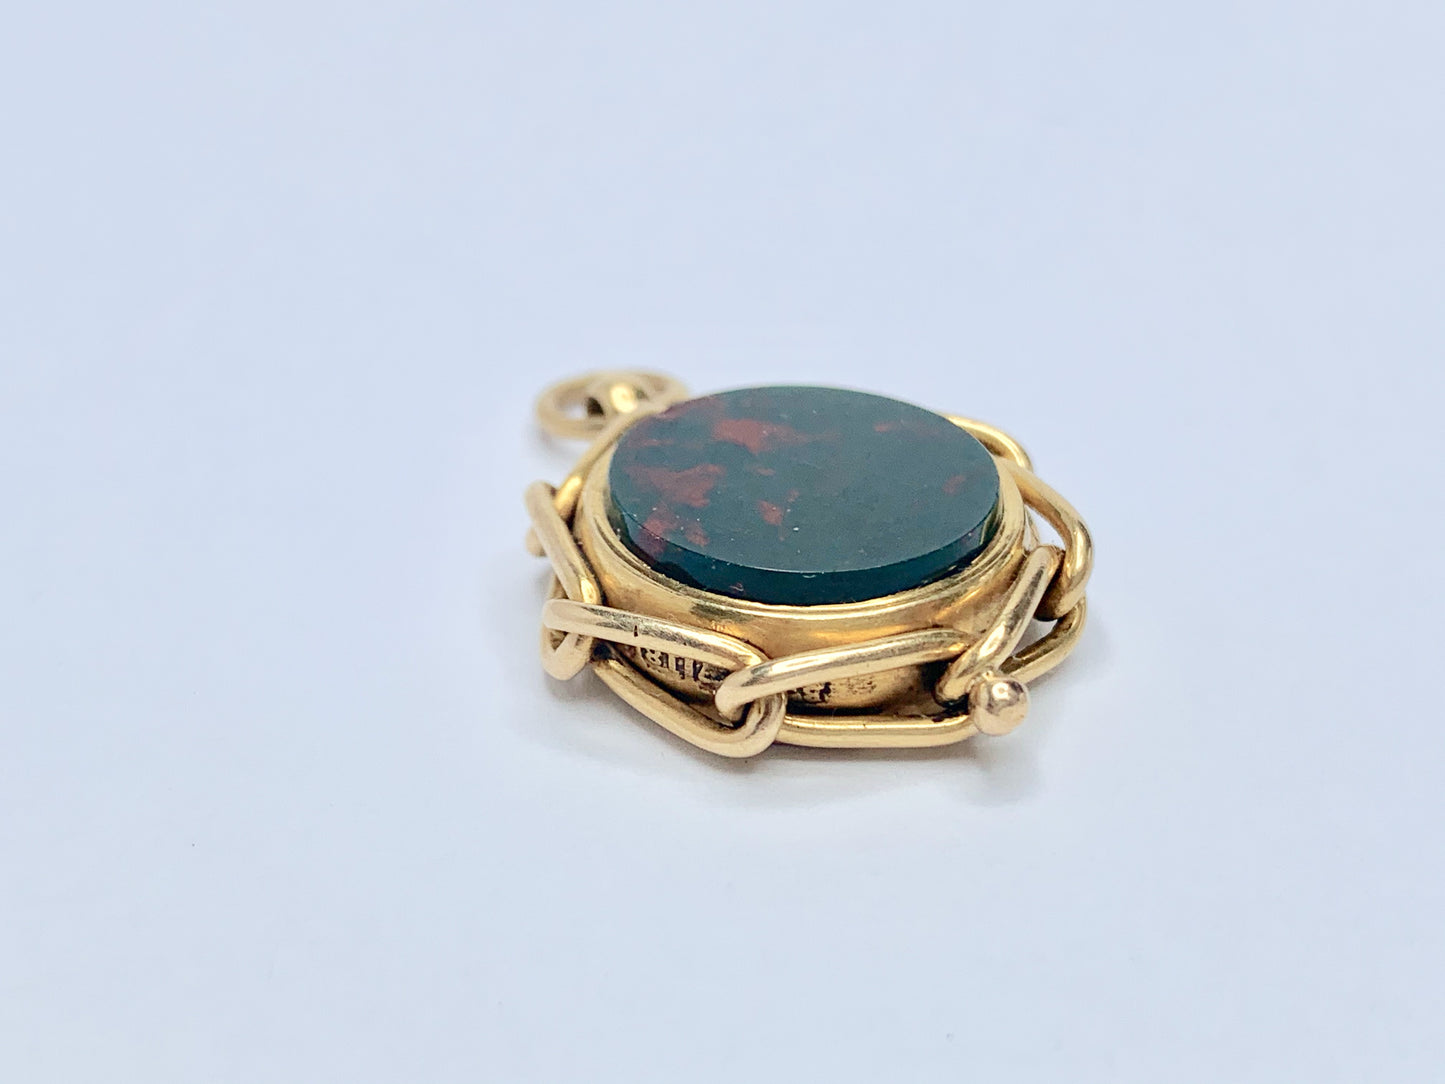 victorian-compass-bloodstone-watch-fob